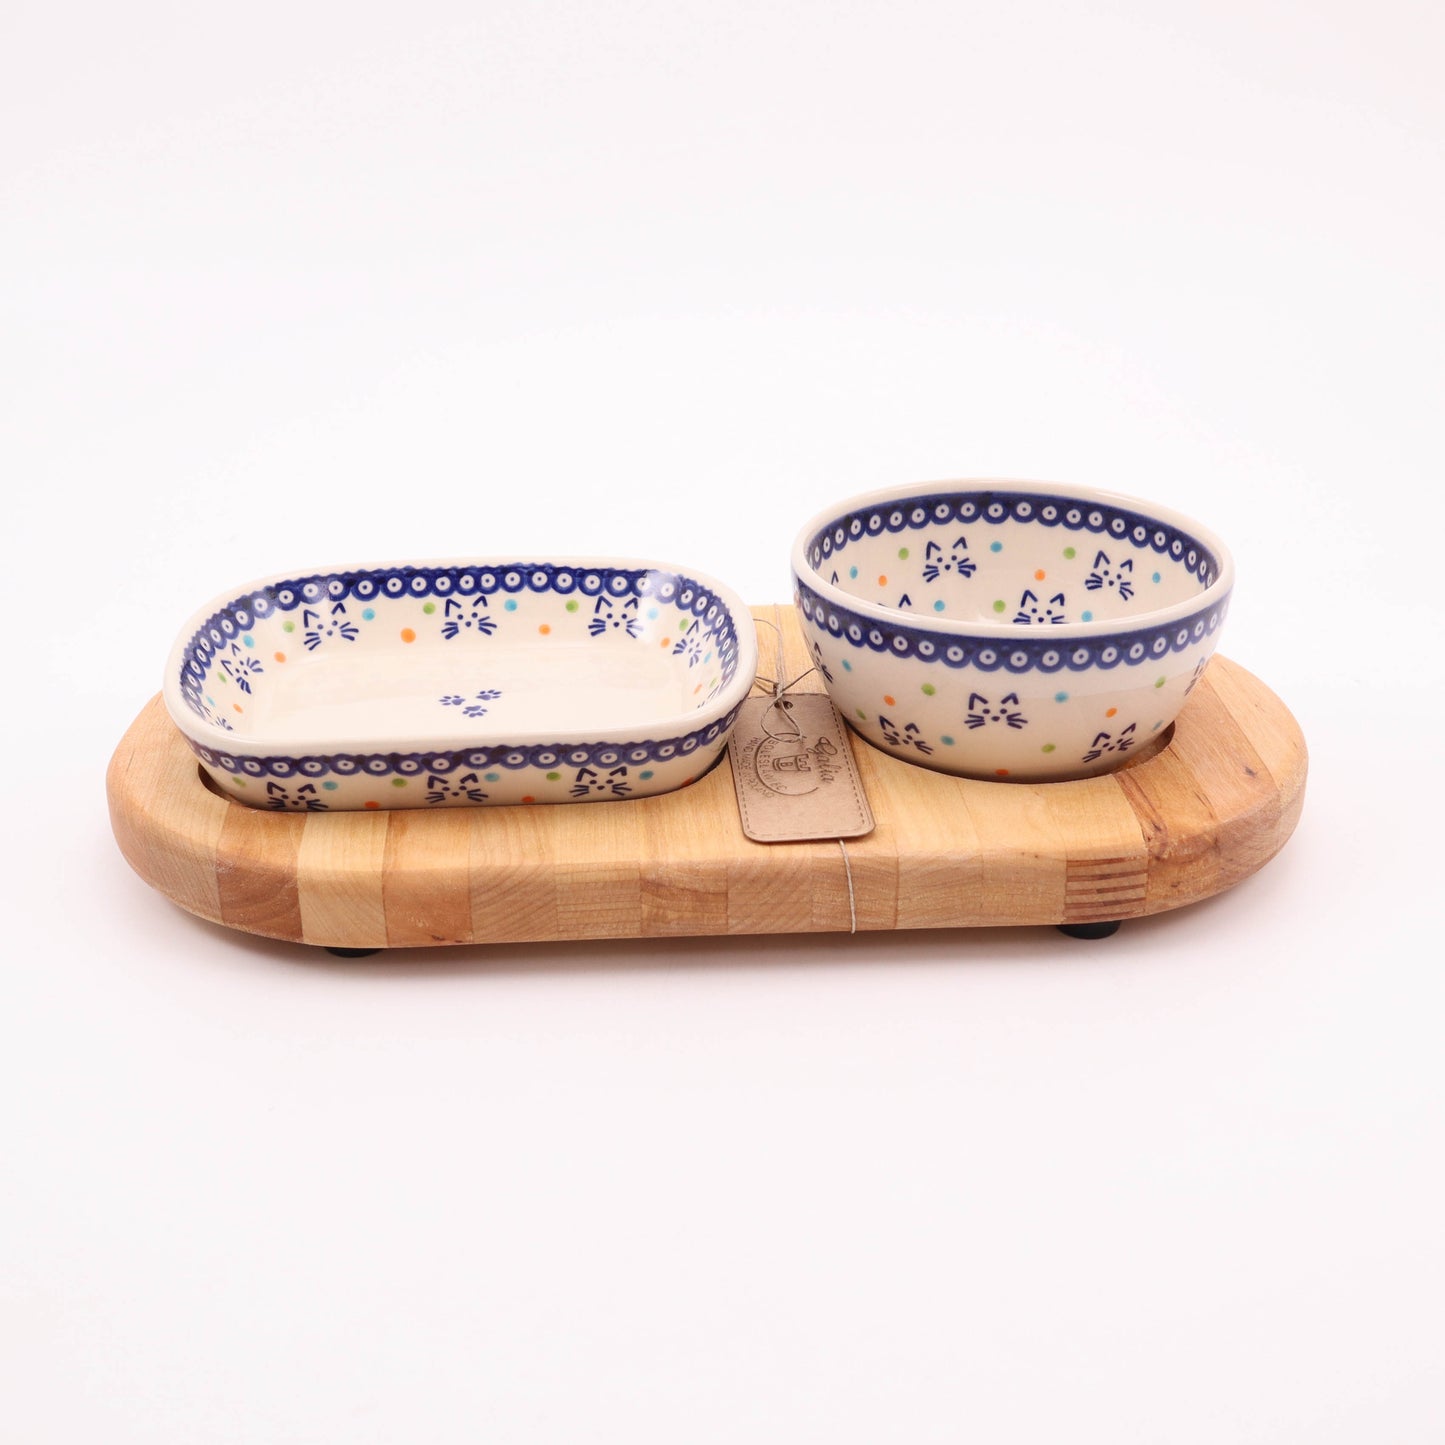 Food and Water Bowl Set. Pattern: Purrfect